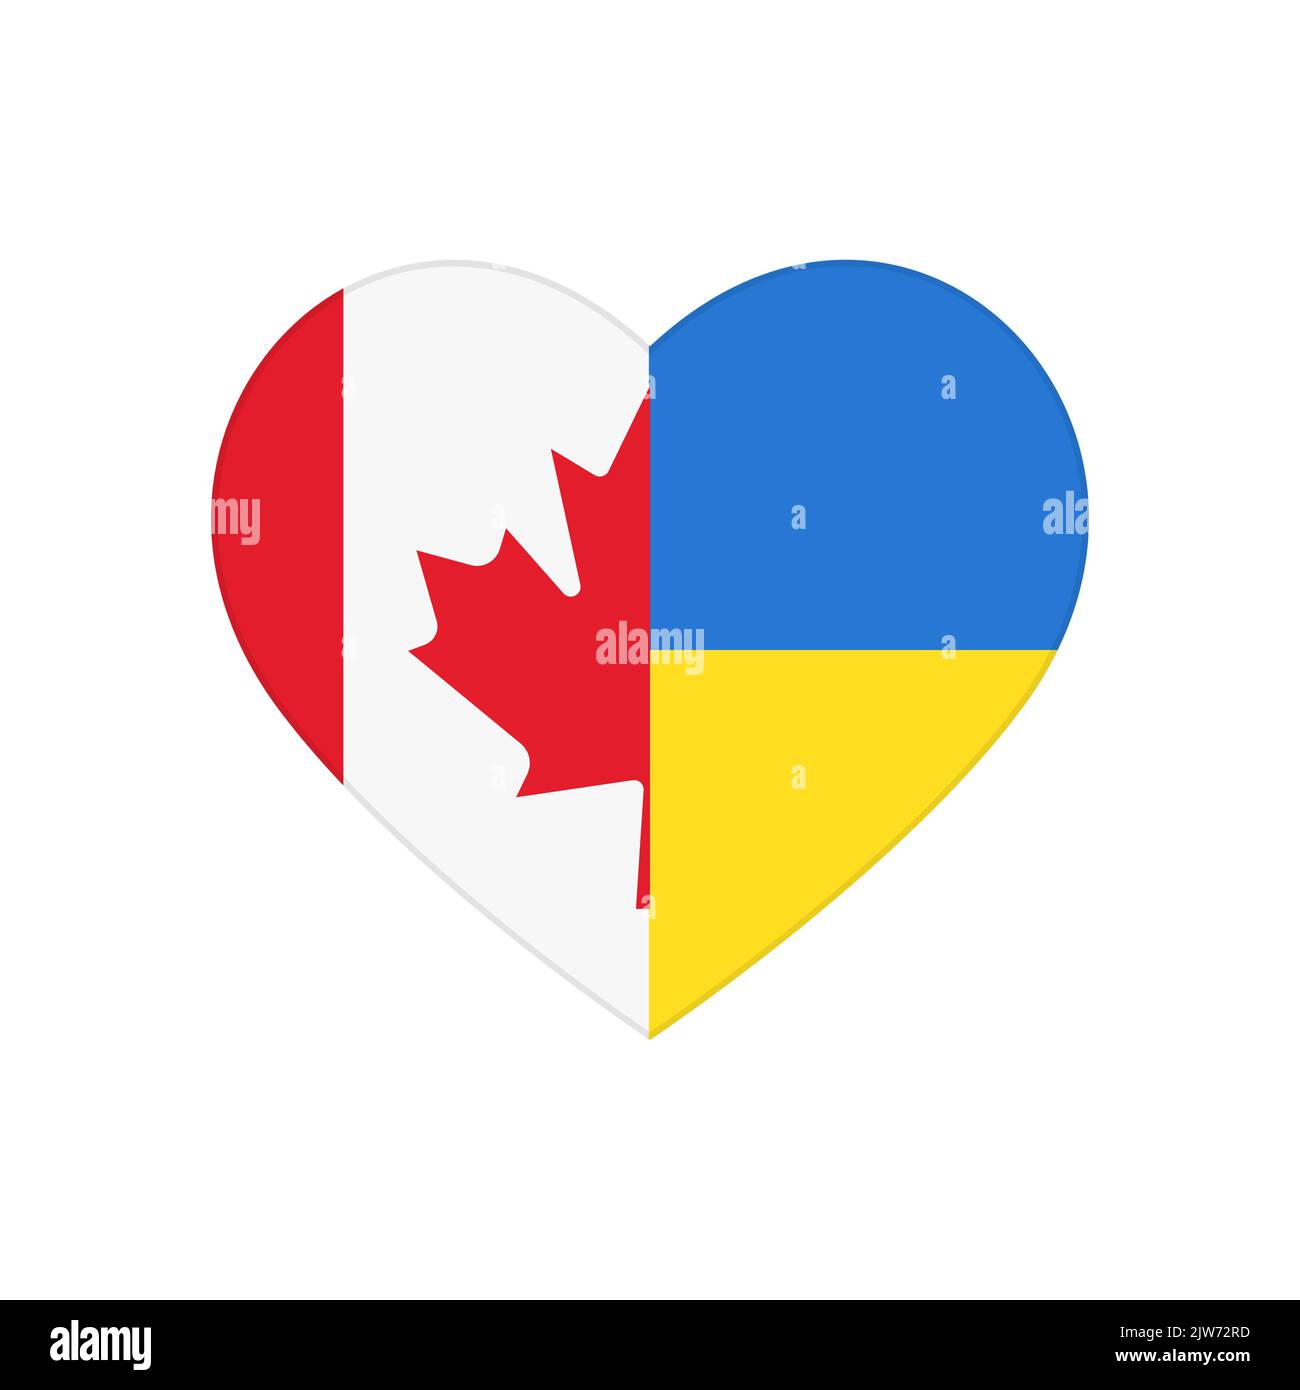 Heart puzzle pieces of Canada and Ukraine flags. Partnership, friendship and support of Canadian people and government for Ukrainian citizens and army, symbol of love and peace between nations Stock Vector